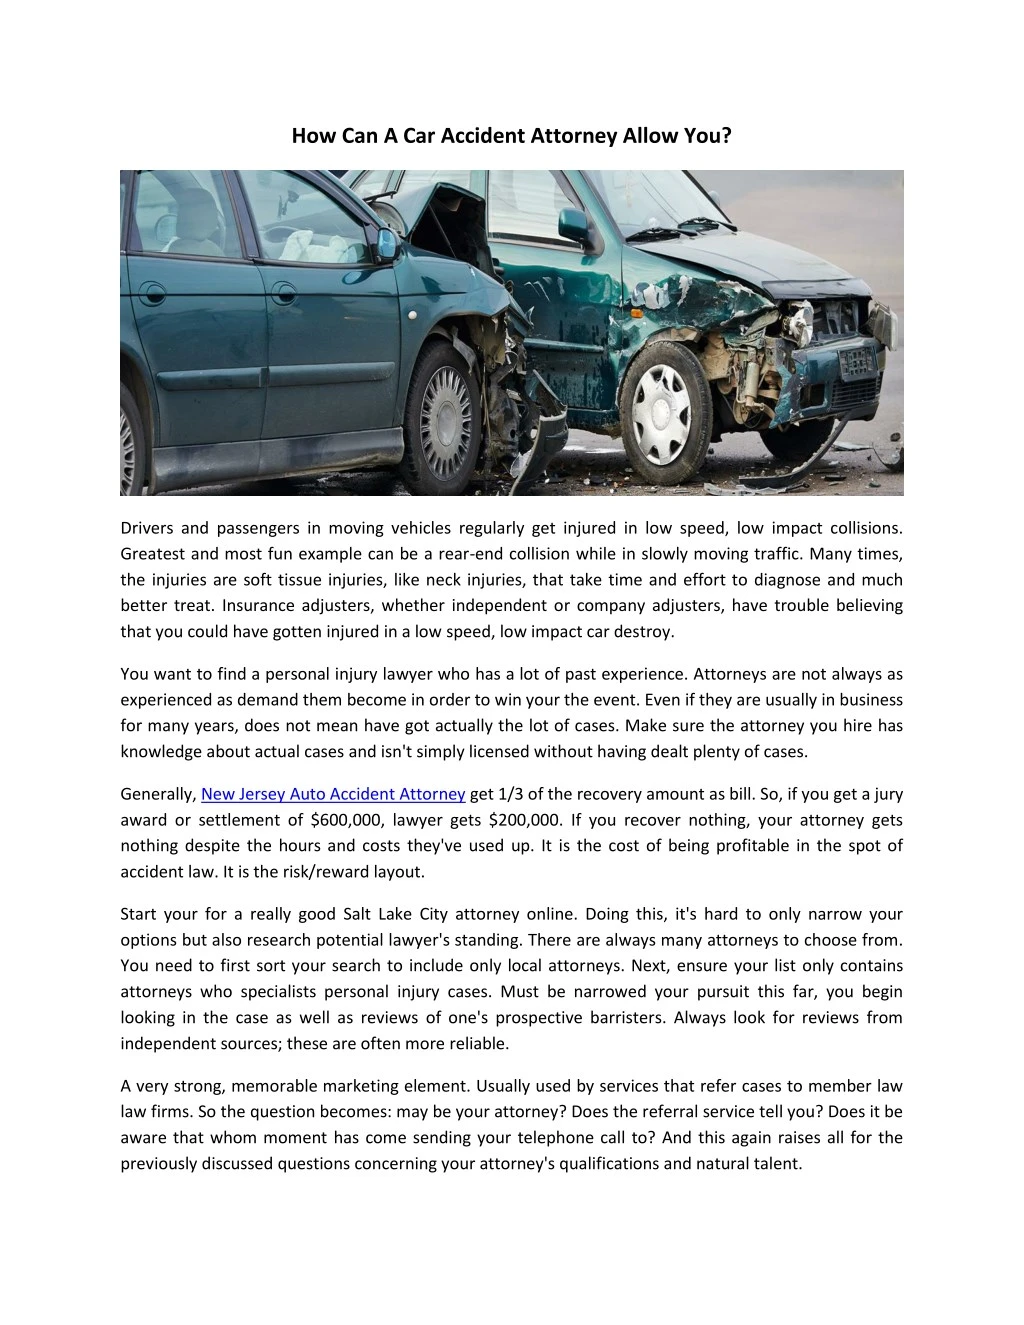 how can a car accident attorney allow you